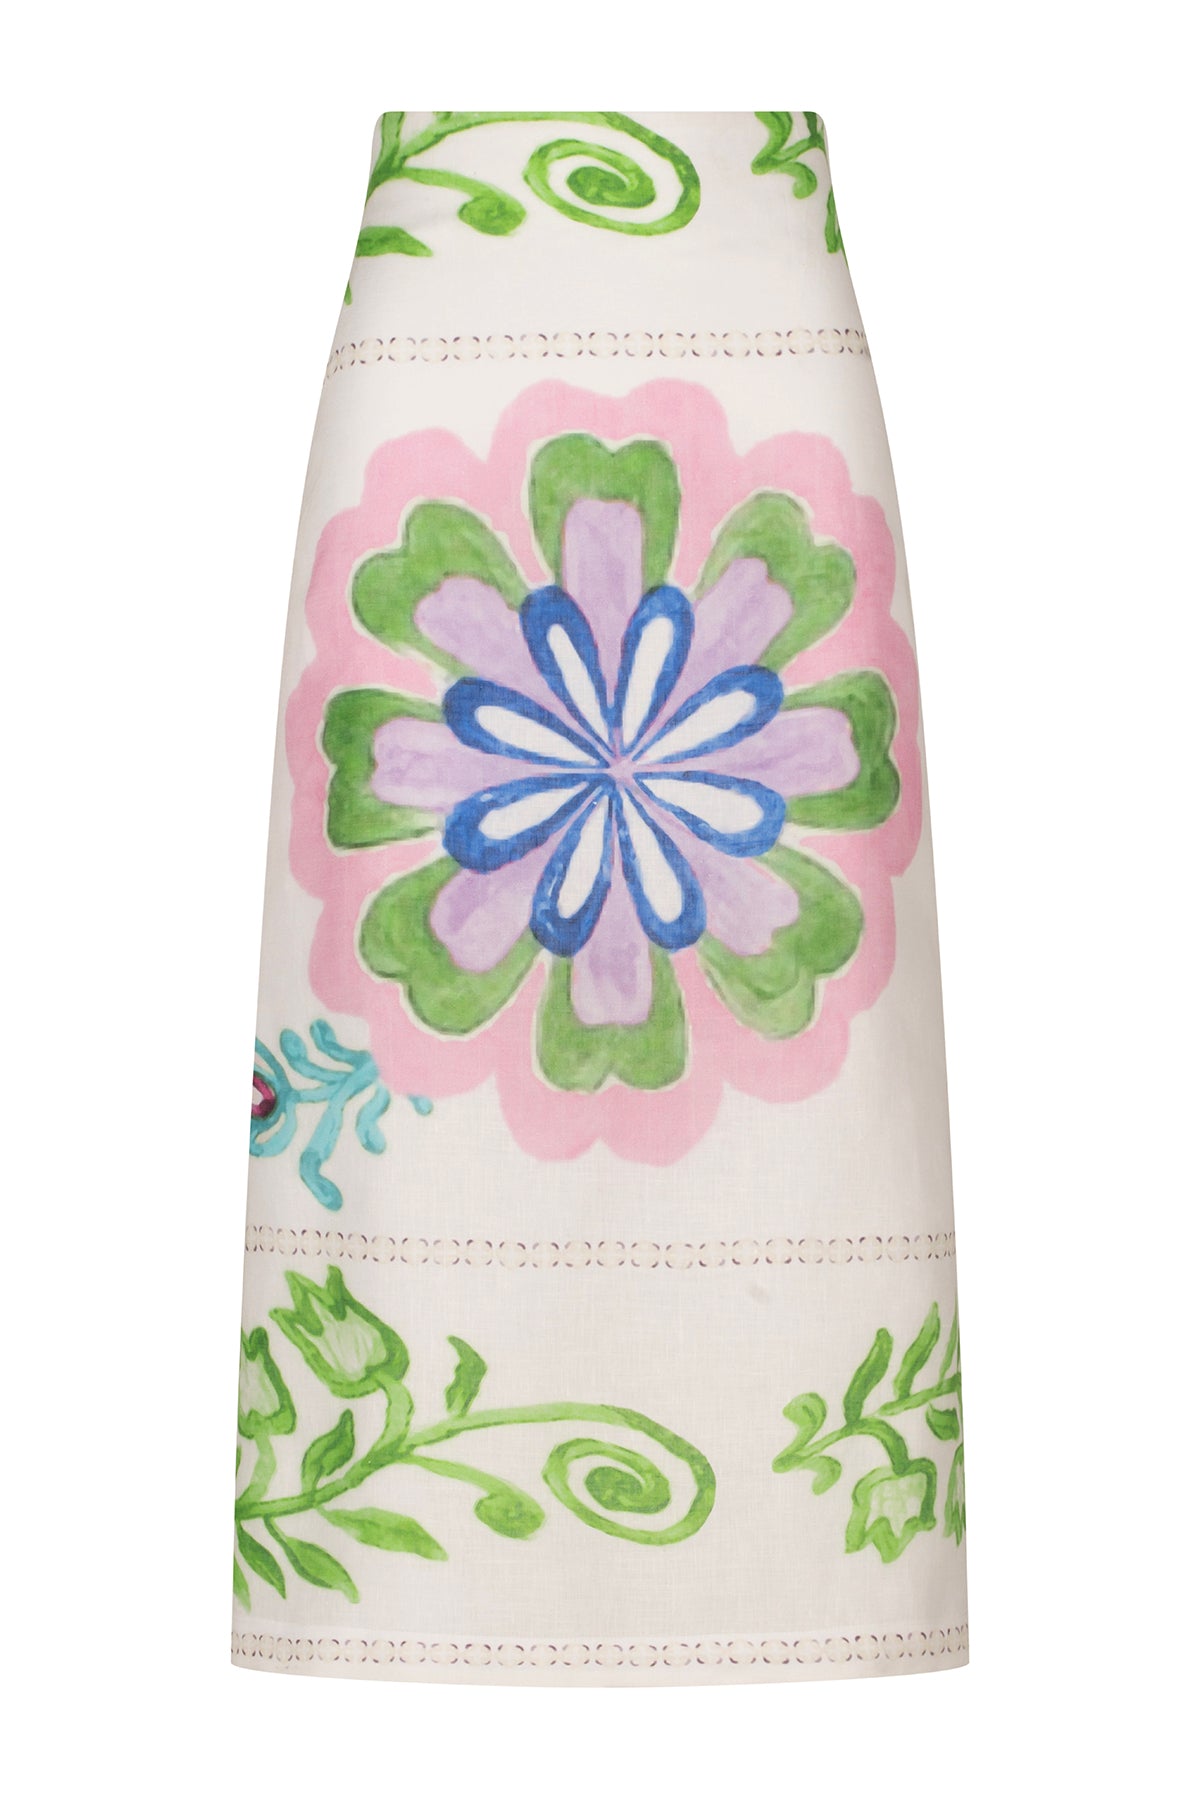 A white high-waisted Atira Skirt Multicolor Floral Print with invisible zipper.